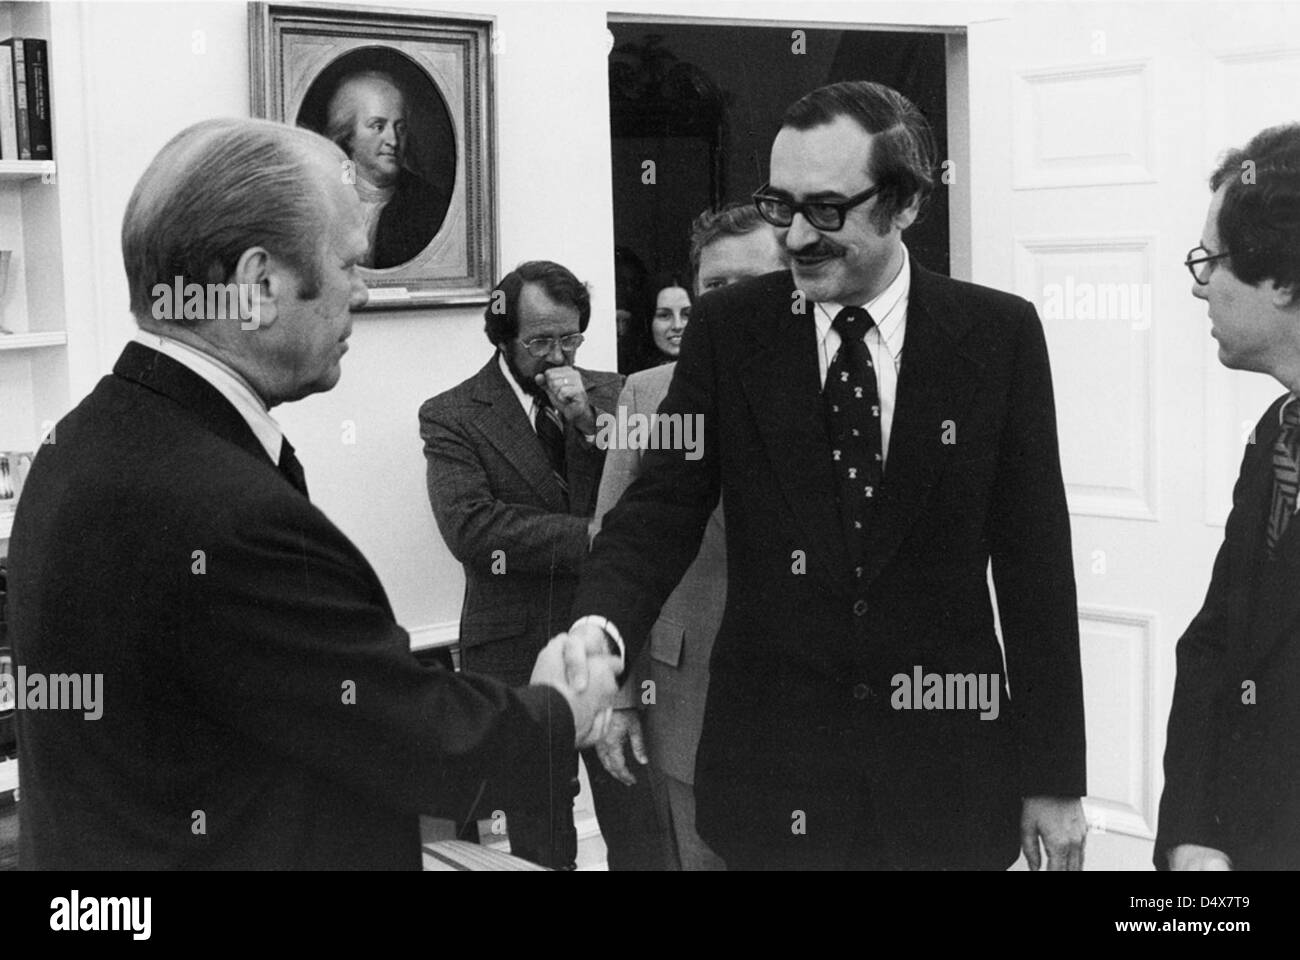 Fifth Archivist of the United States Dr. James B. Rhoads Shaking Hands with President Gerald Ford, June 14, 1976 Stock Photo